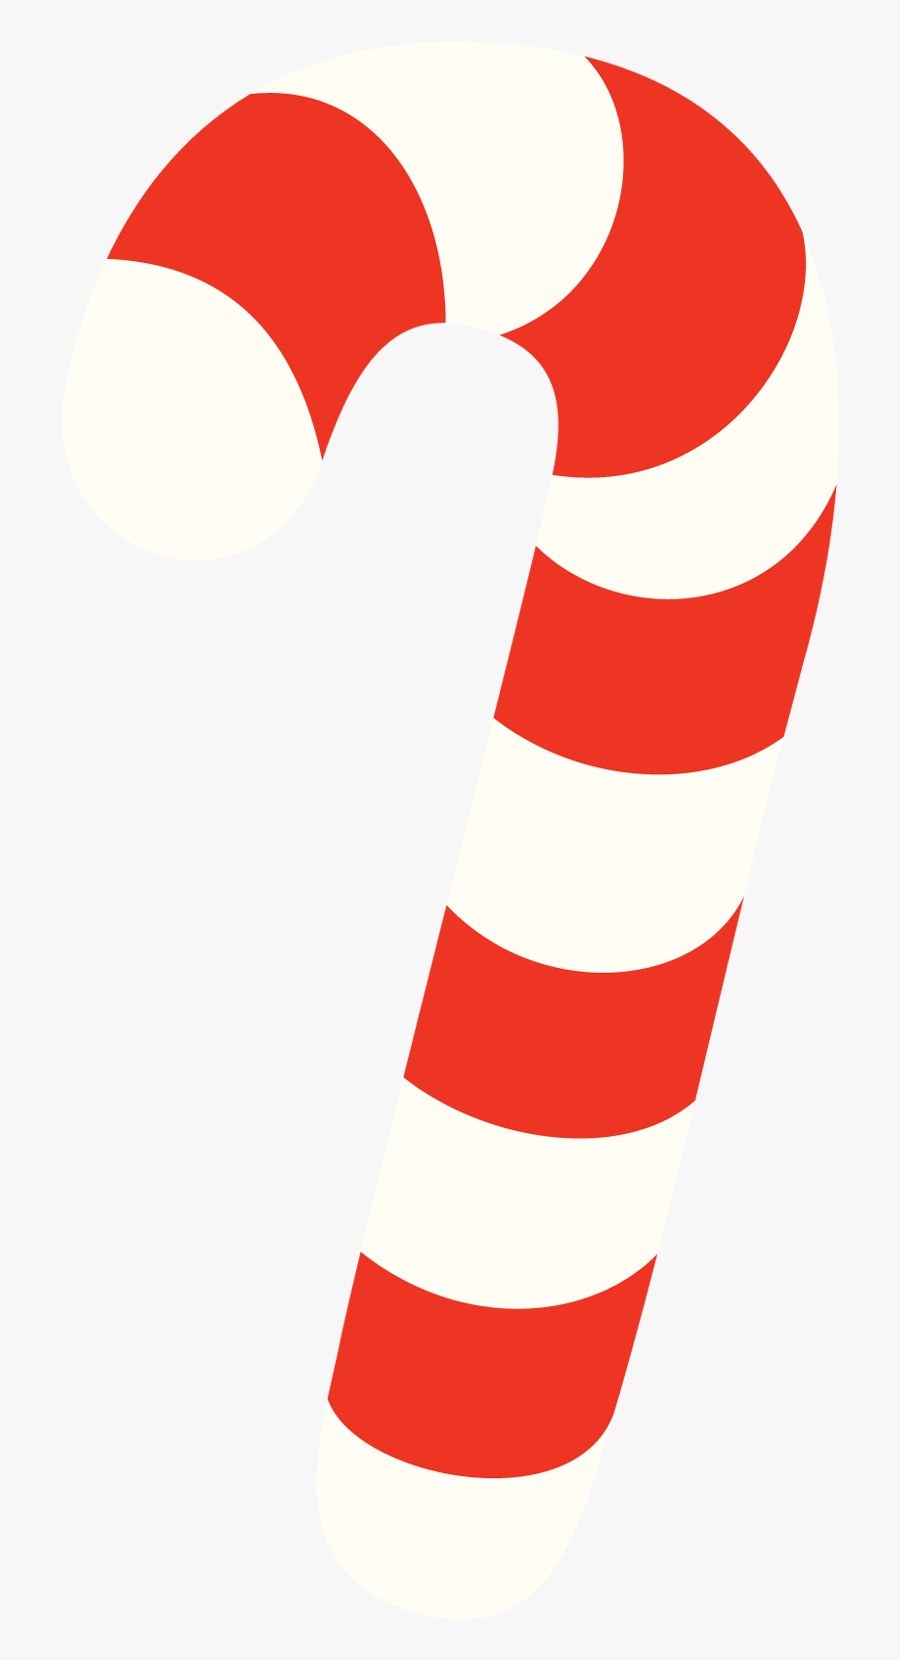 Candy Cane Free To Use Clip Art - Candy Cane Clipart Png, Transparent Clipart